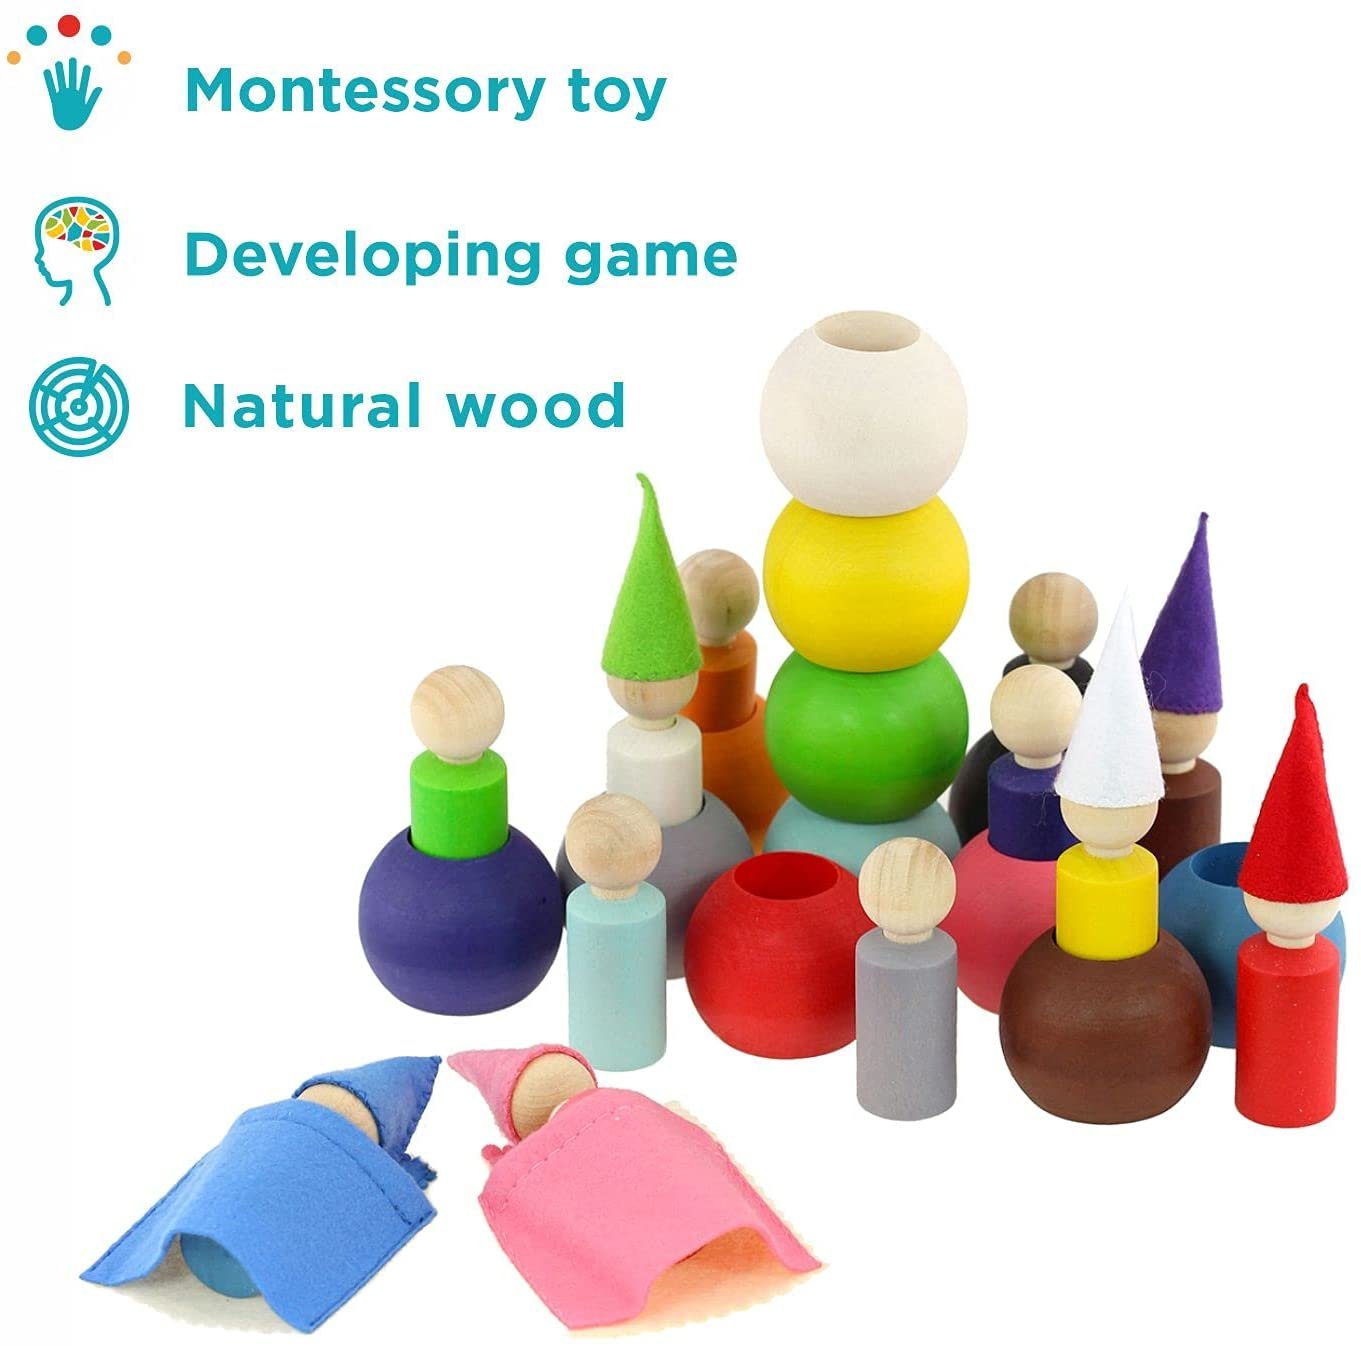 Ulanik Peg Dolls in Balls with Hats & Beds Toddler Montessori Toys for 3+ Wooden Waldorf Dolls for Learning Color Sorting & Counting